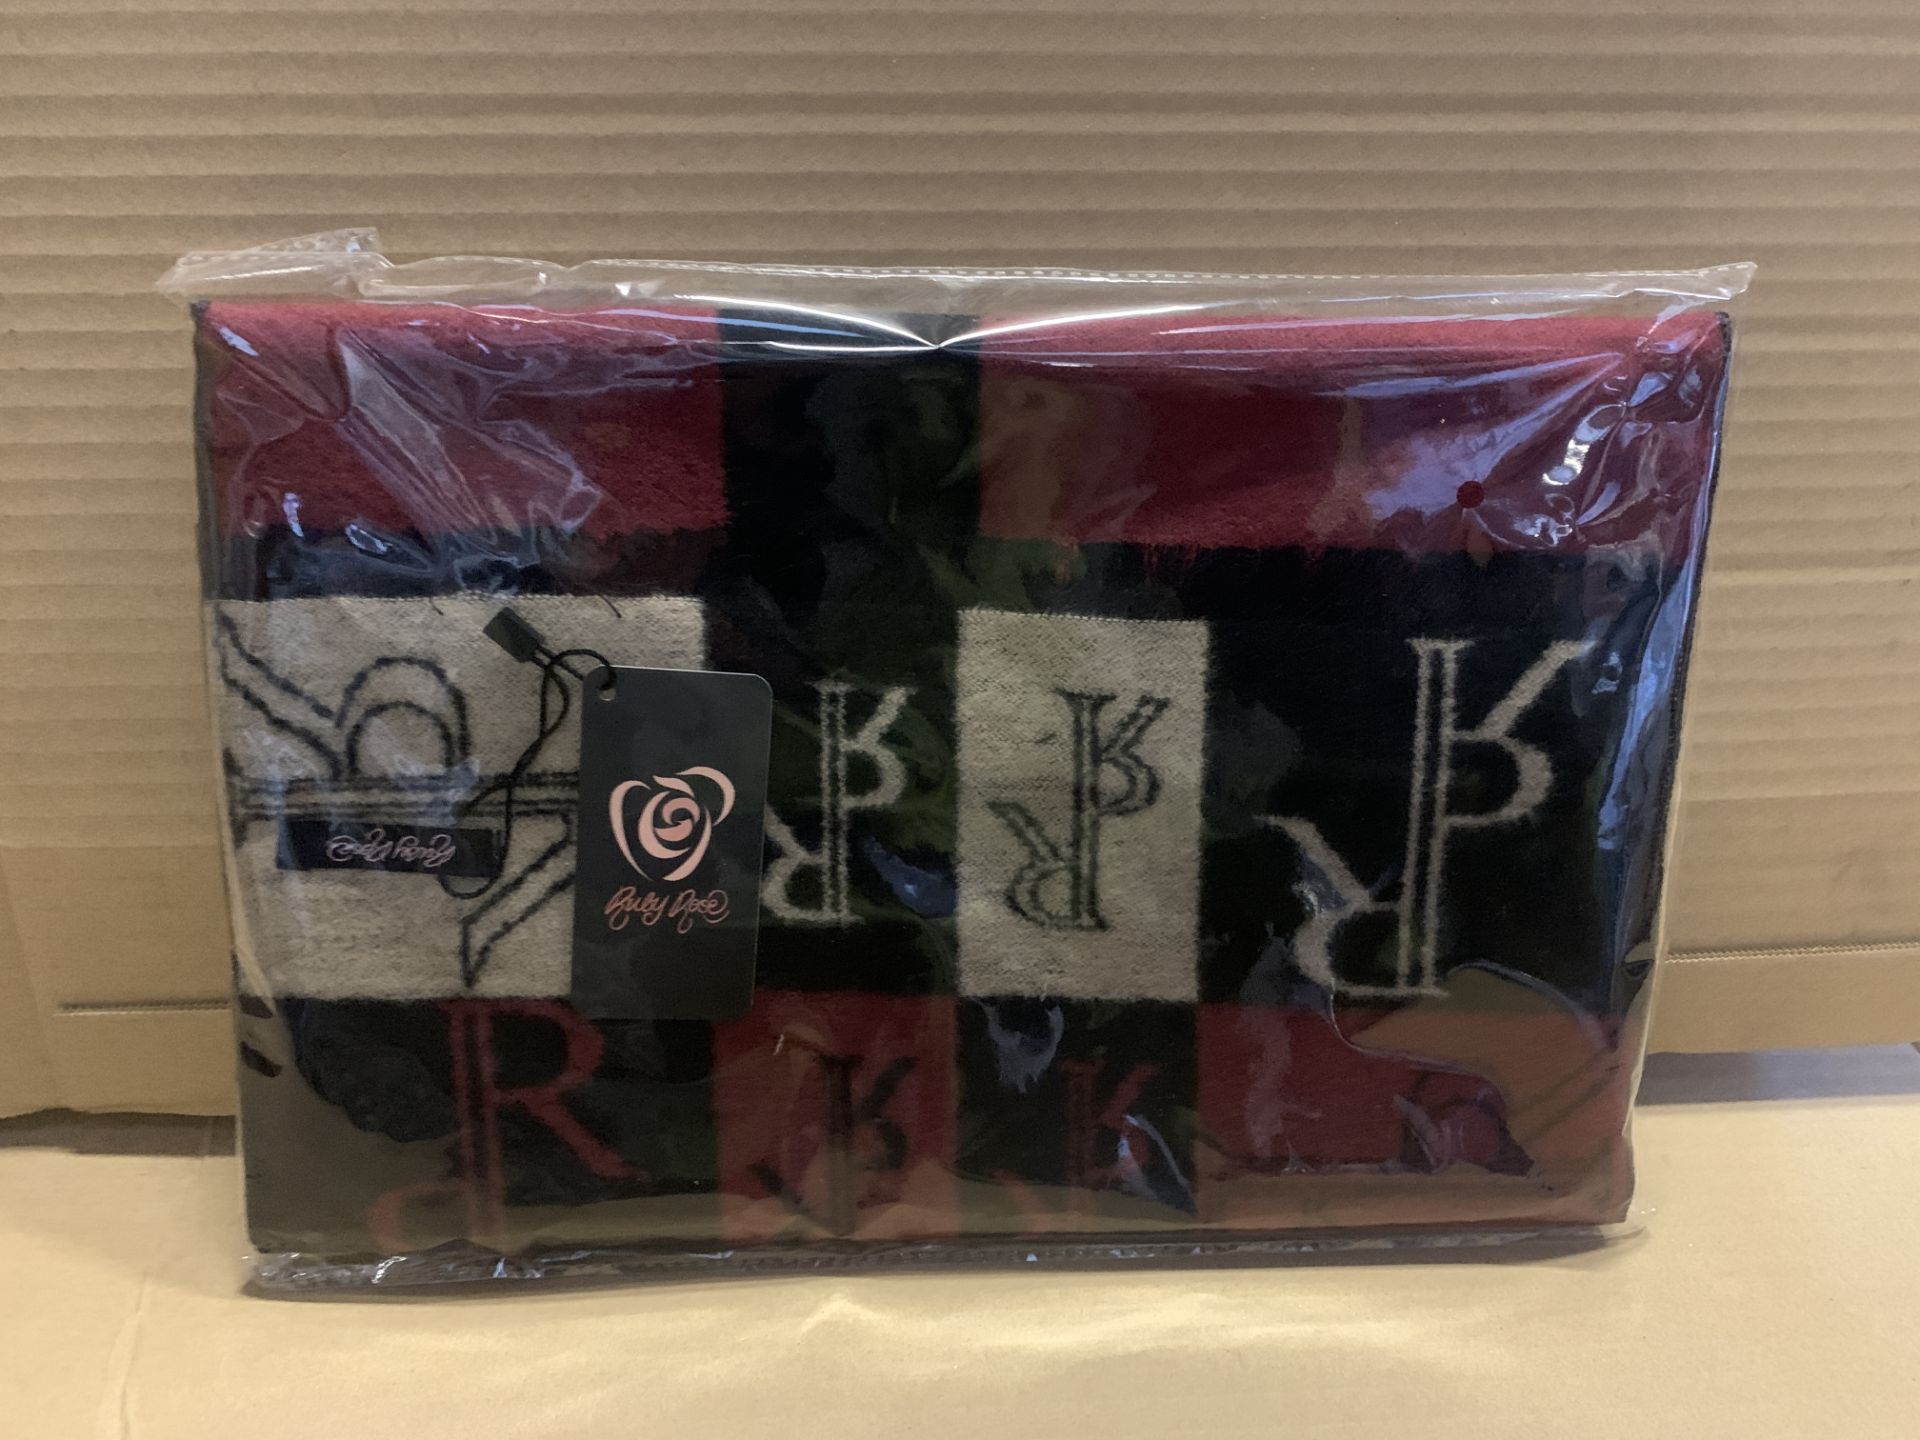 12 X BRAND NEW RUBY ROSE LOGO PATTERNED BRUSHED SILK WINTER SCARVES RRP £55 EACH S1RA